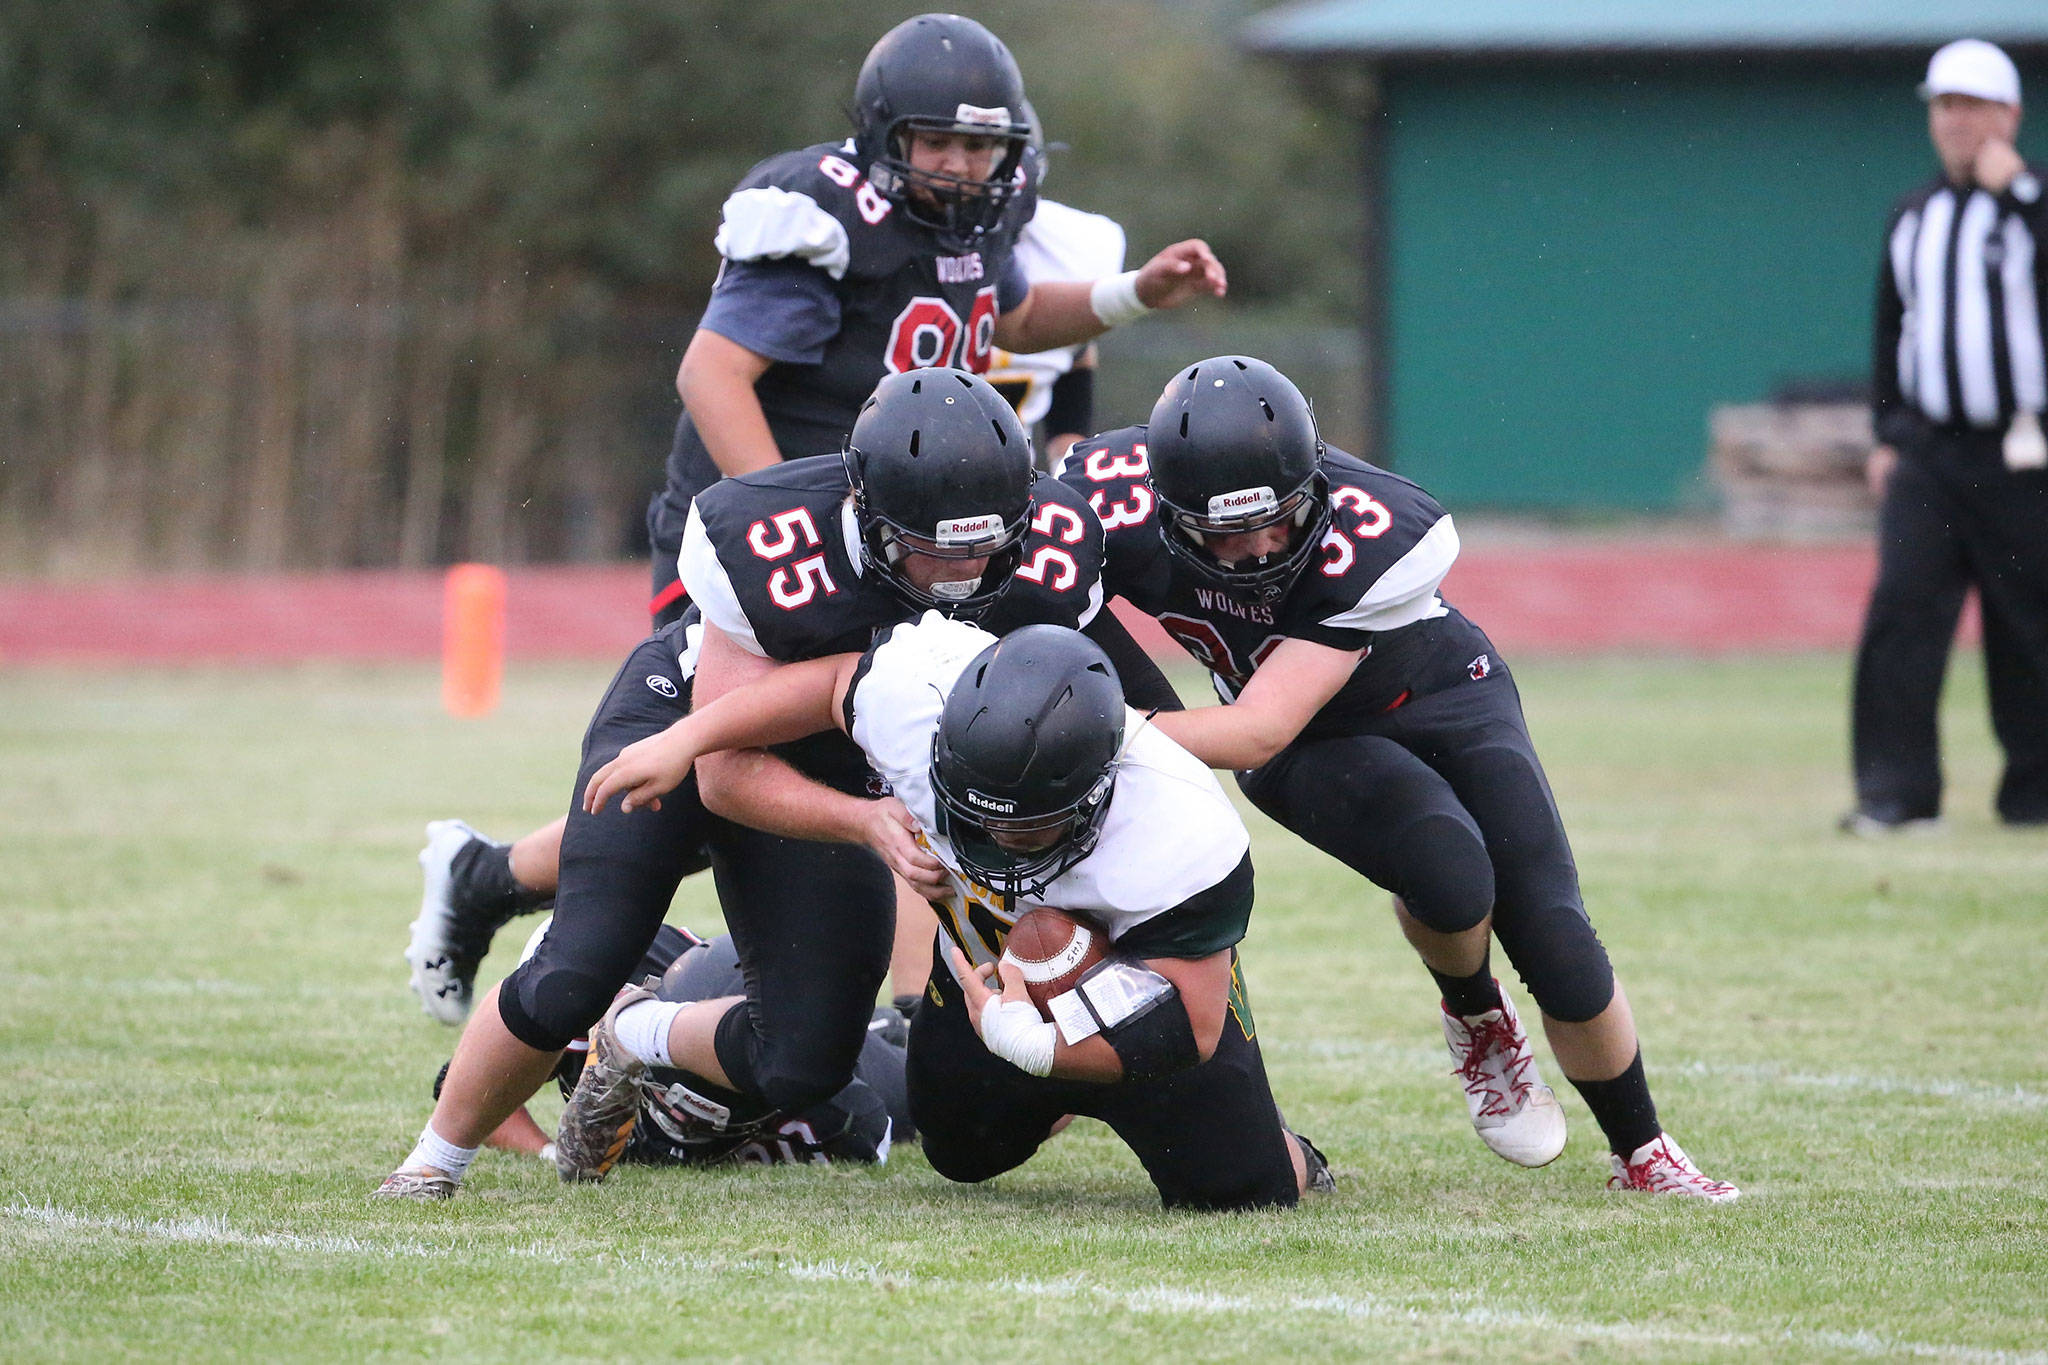 Coupeville defenders Alex Turner (55) and Gavin Knoblich (33) smother a Vashon Island ball carrier as Isaiah Bittner closes in.(Photo by John Fisken)